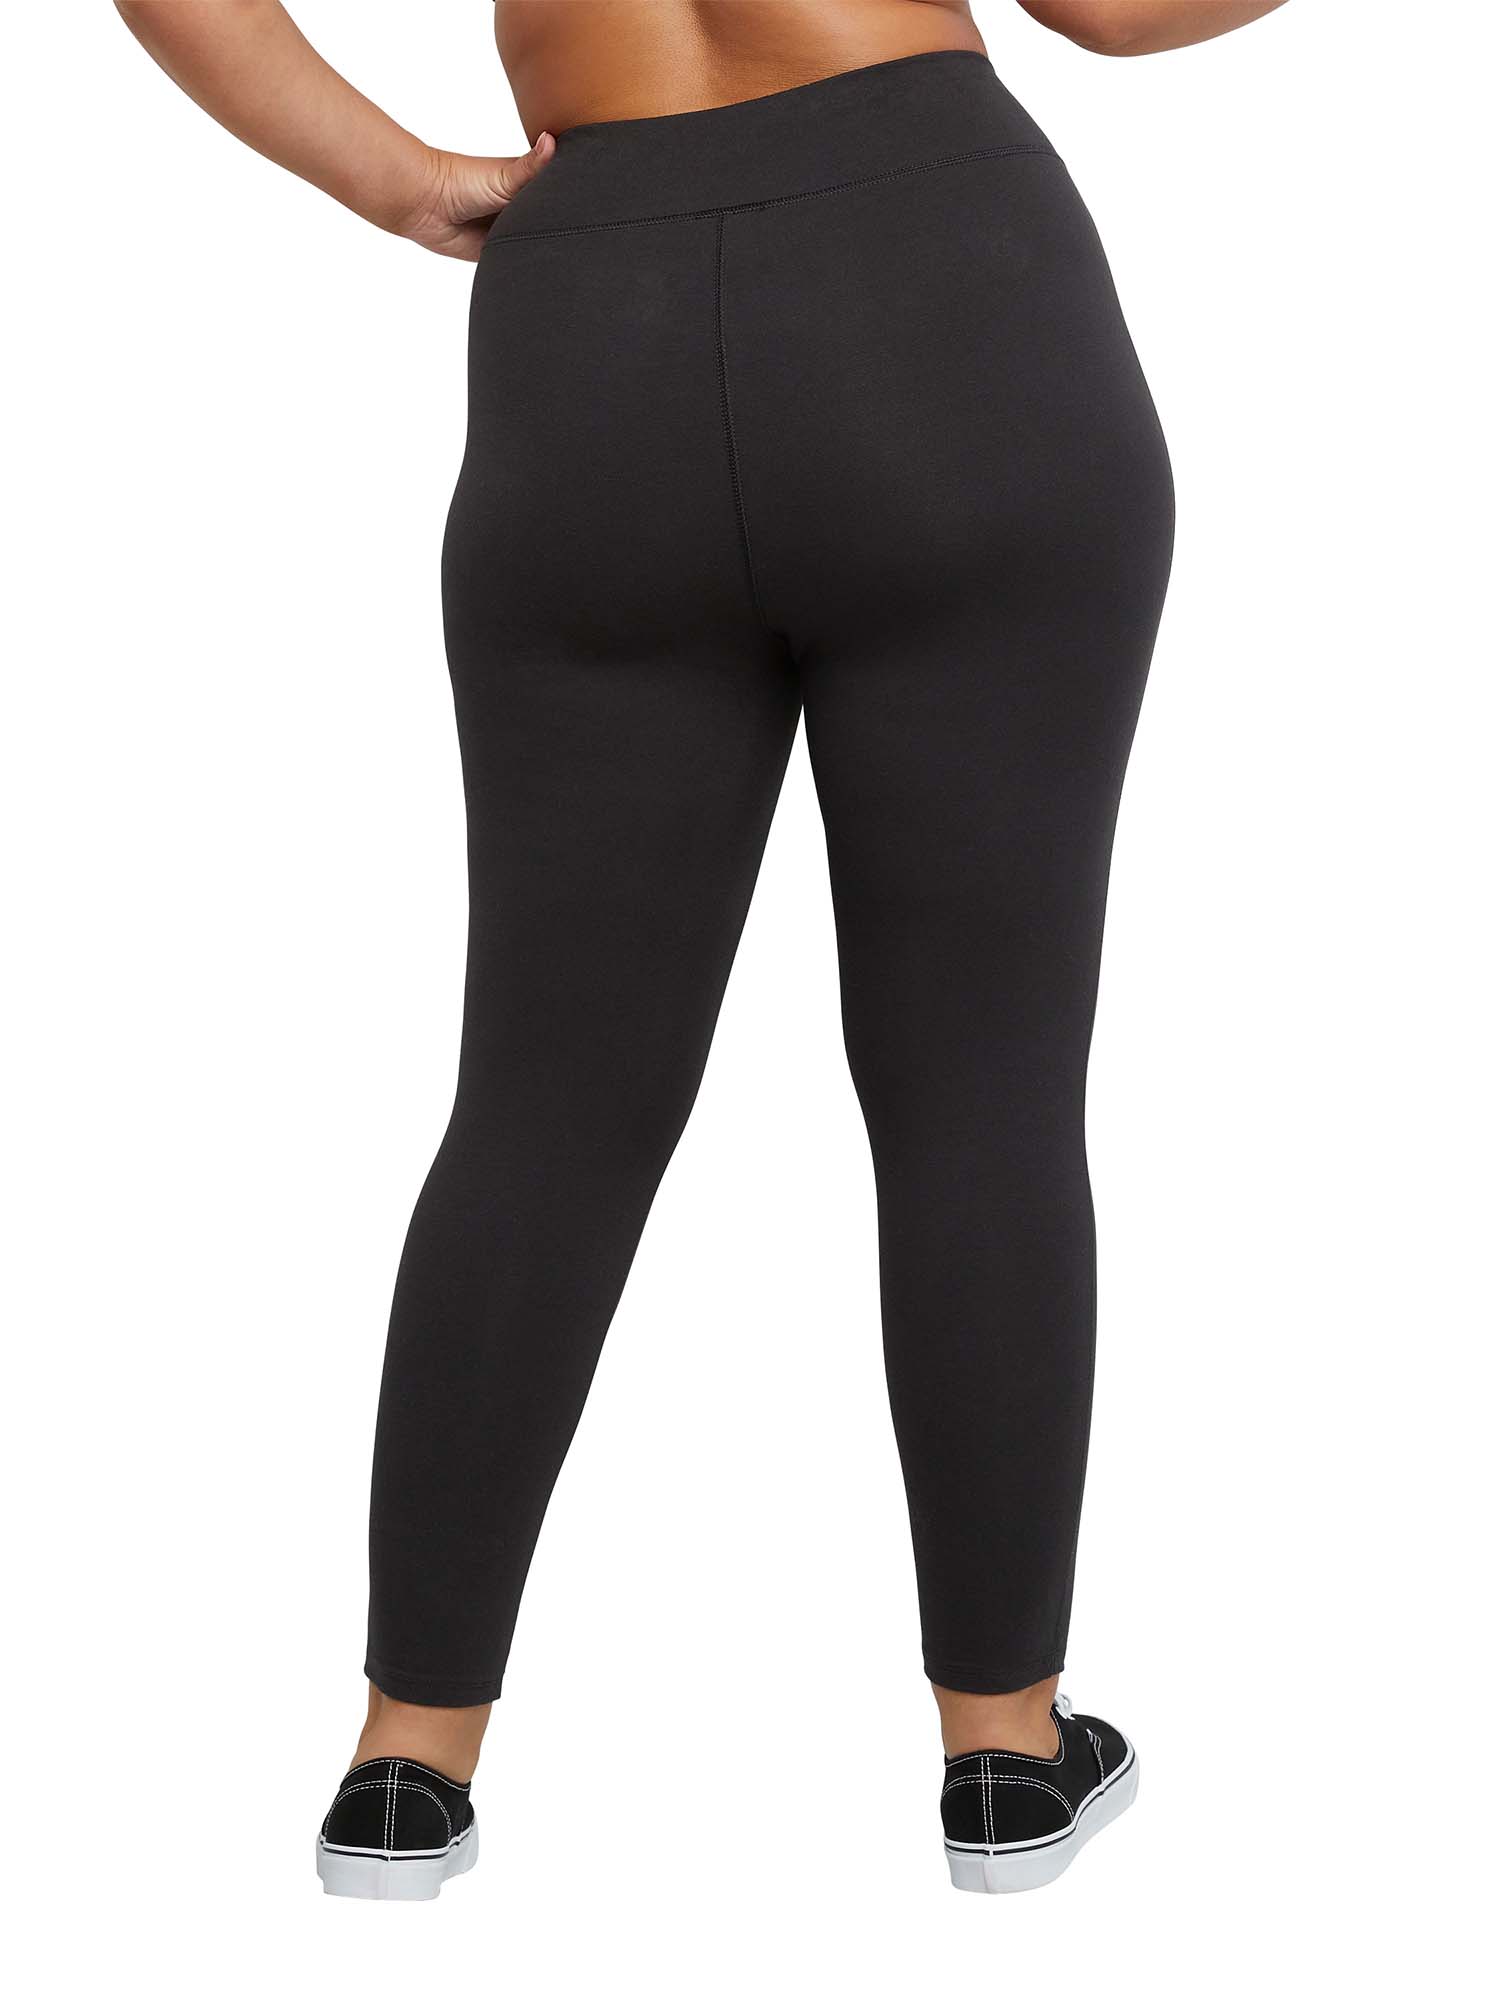 JMS by Hanes Women's Plus Size Stretch Jersey Legging - image 3 of 6